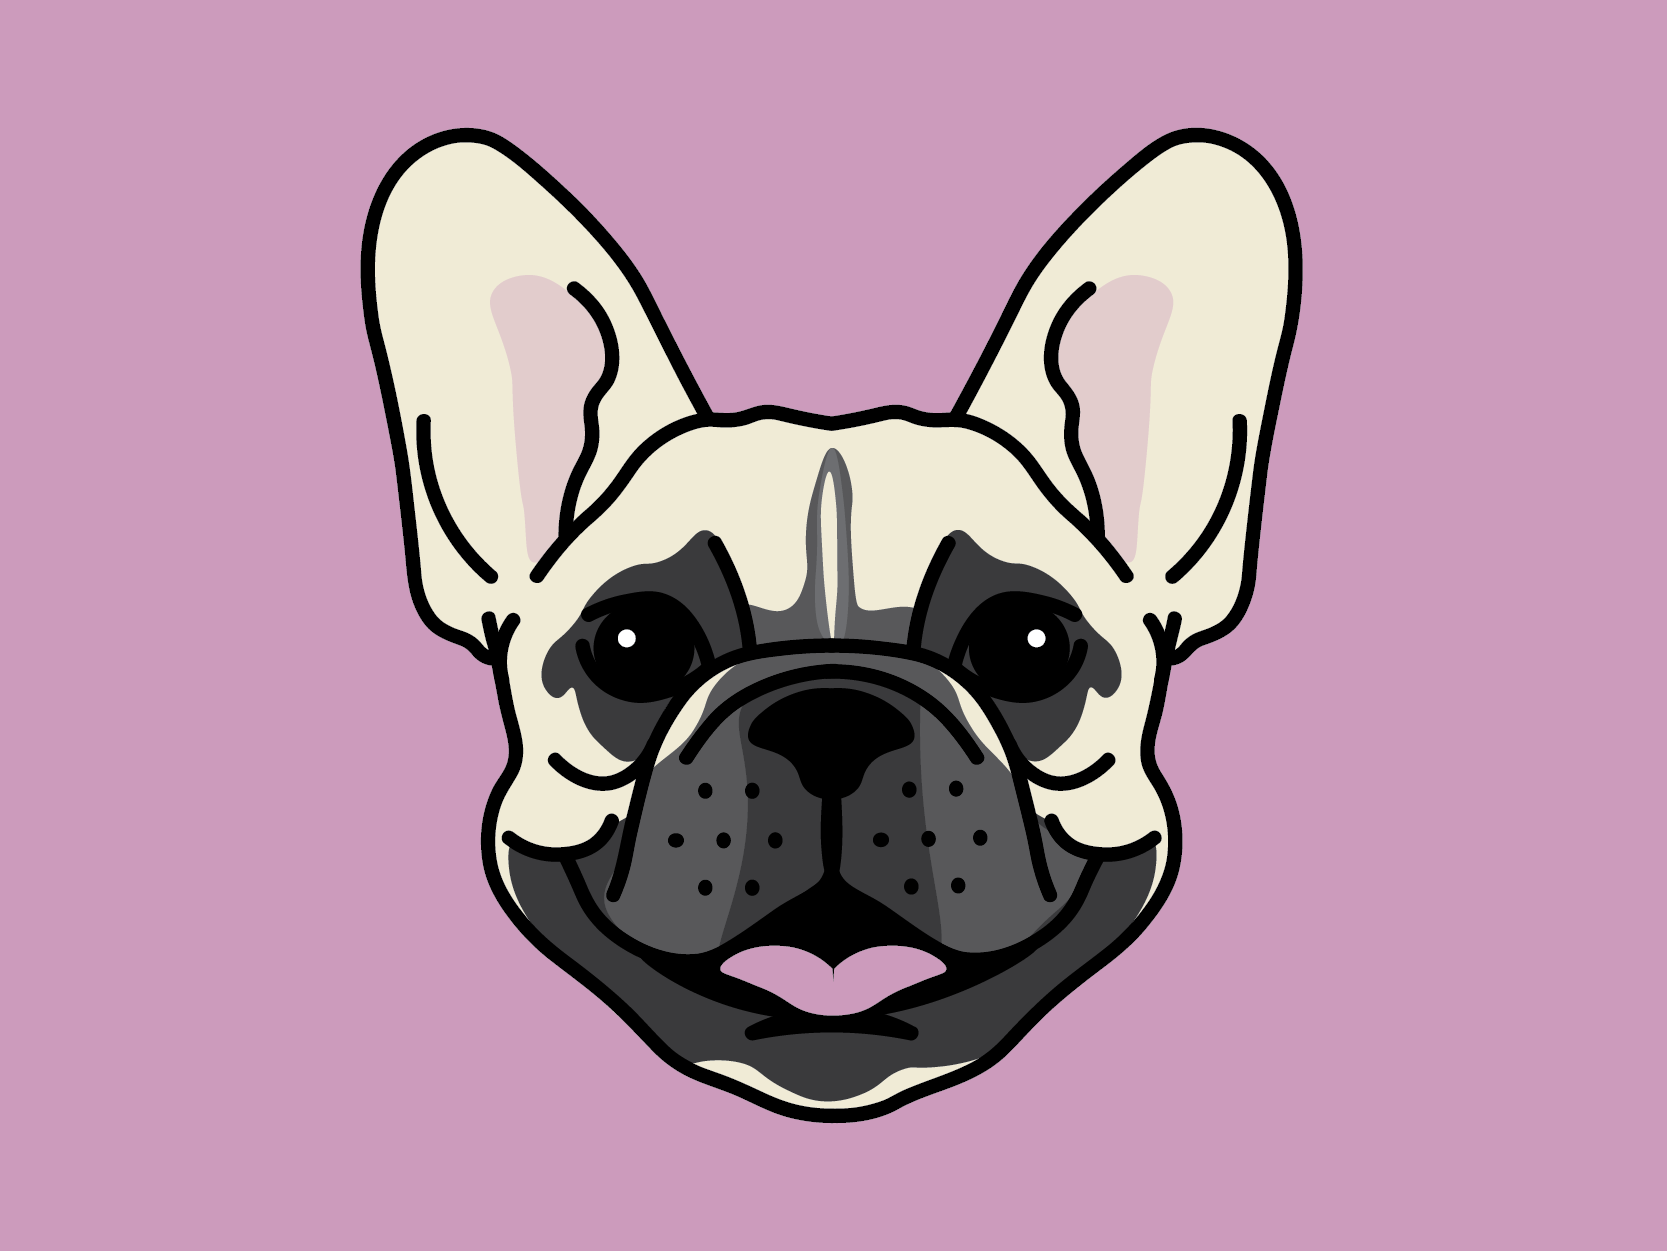 Babe, the Frenchie. by Chelsea Burkett on Dribbble